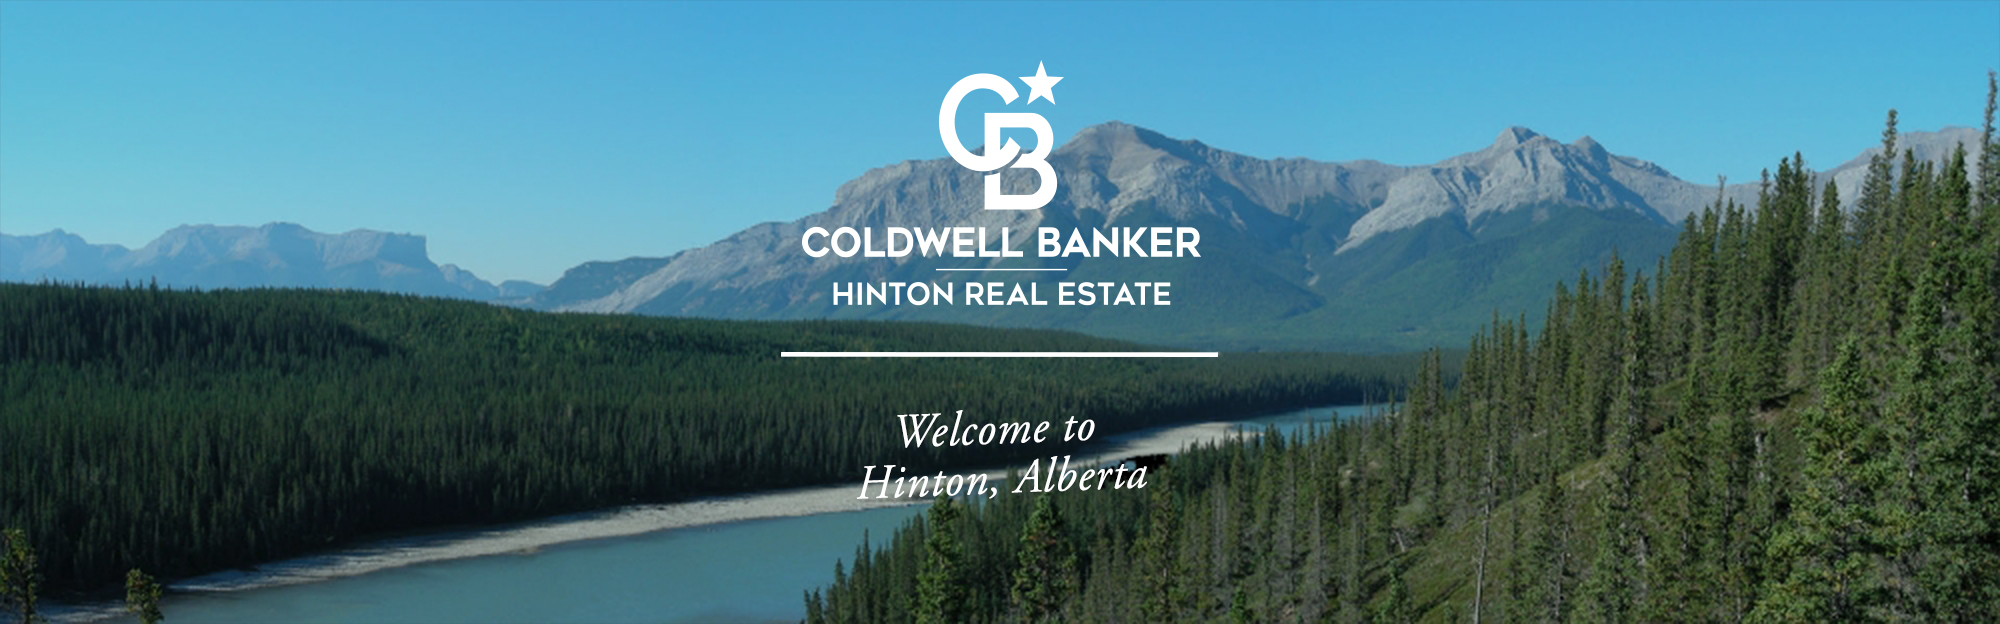 Welcome to Hinton, Alberta!